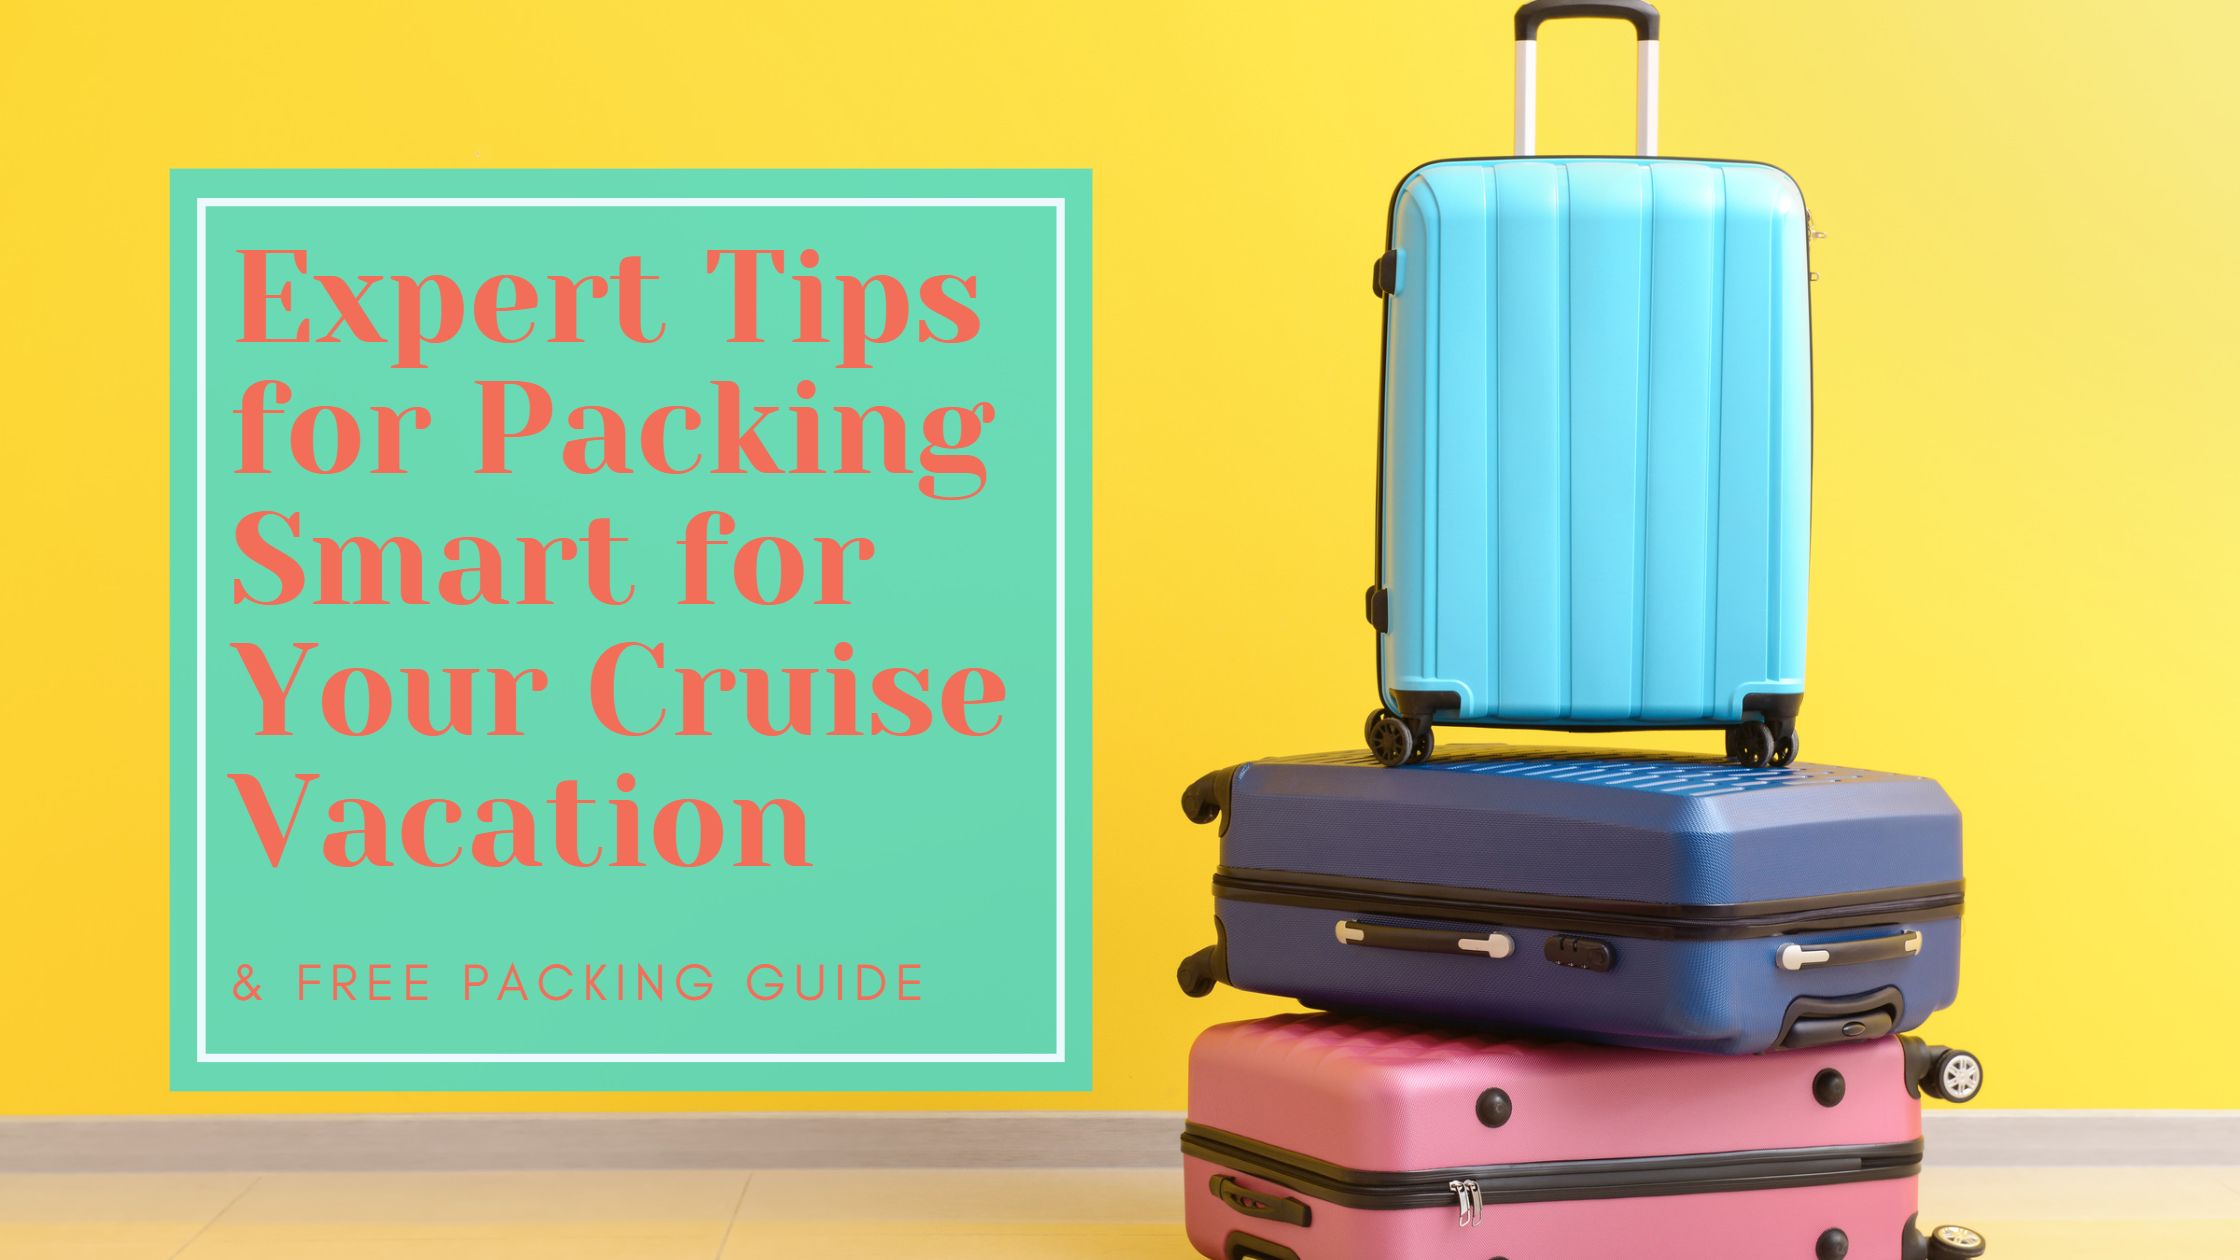 Expert Tips for Packing Smart for Your Cruise Vacation